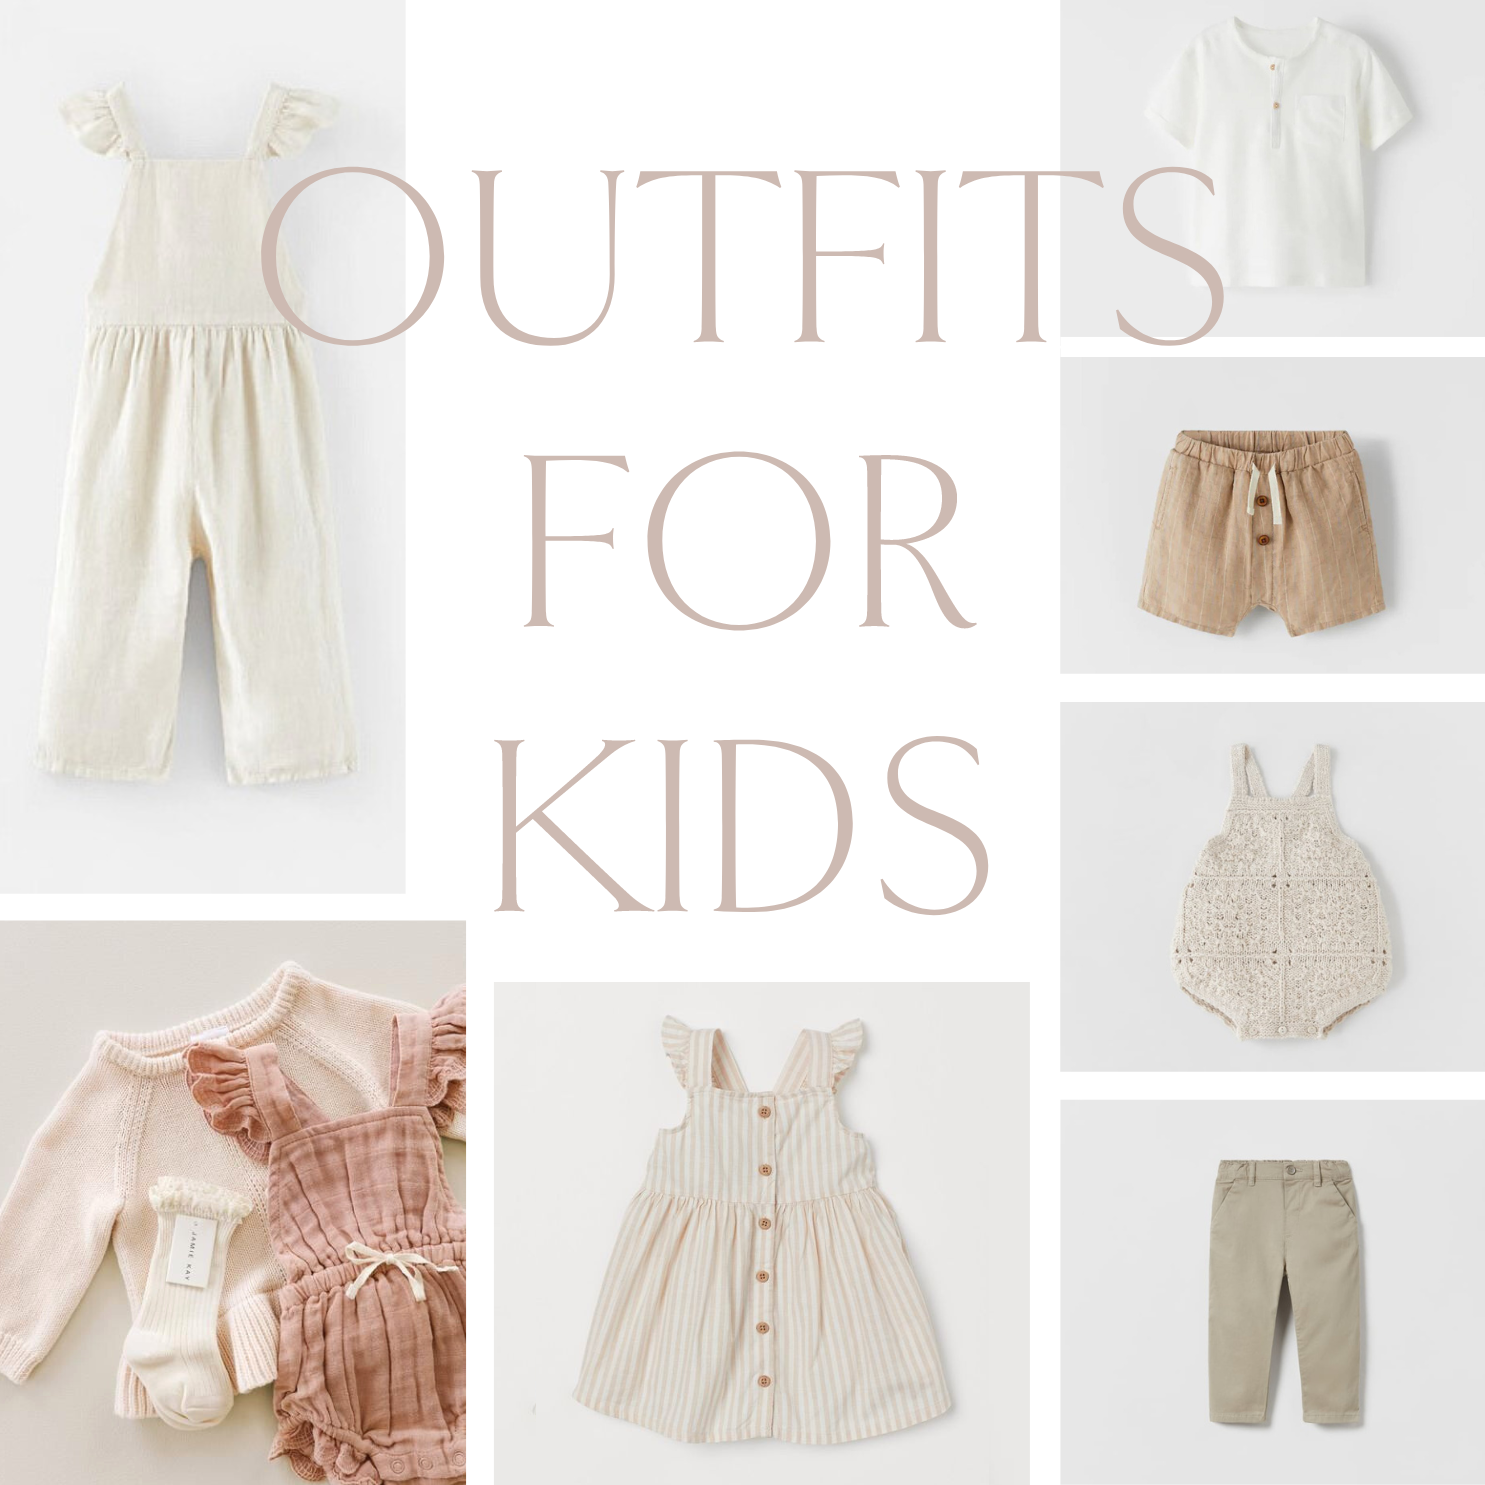 kids outfit inspiration for photoshoots